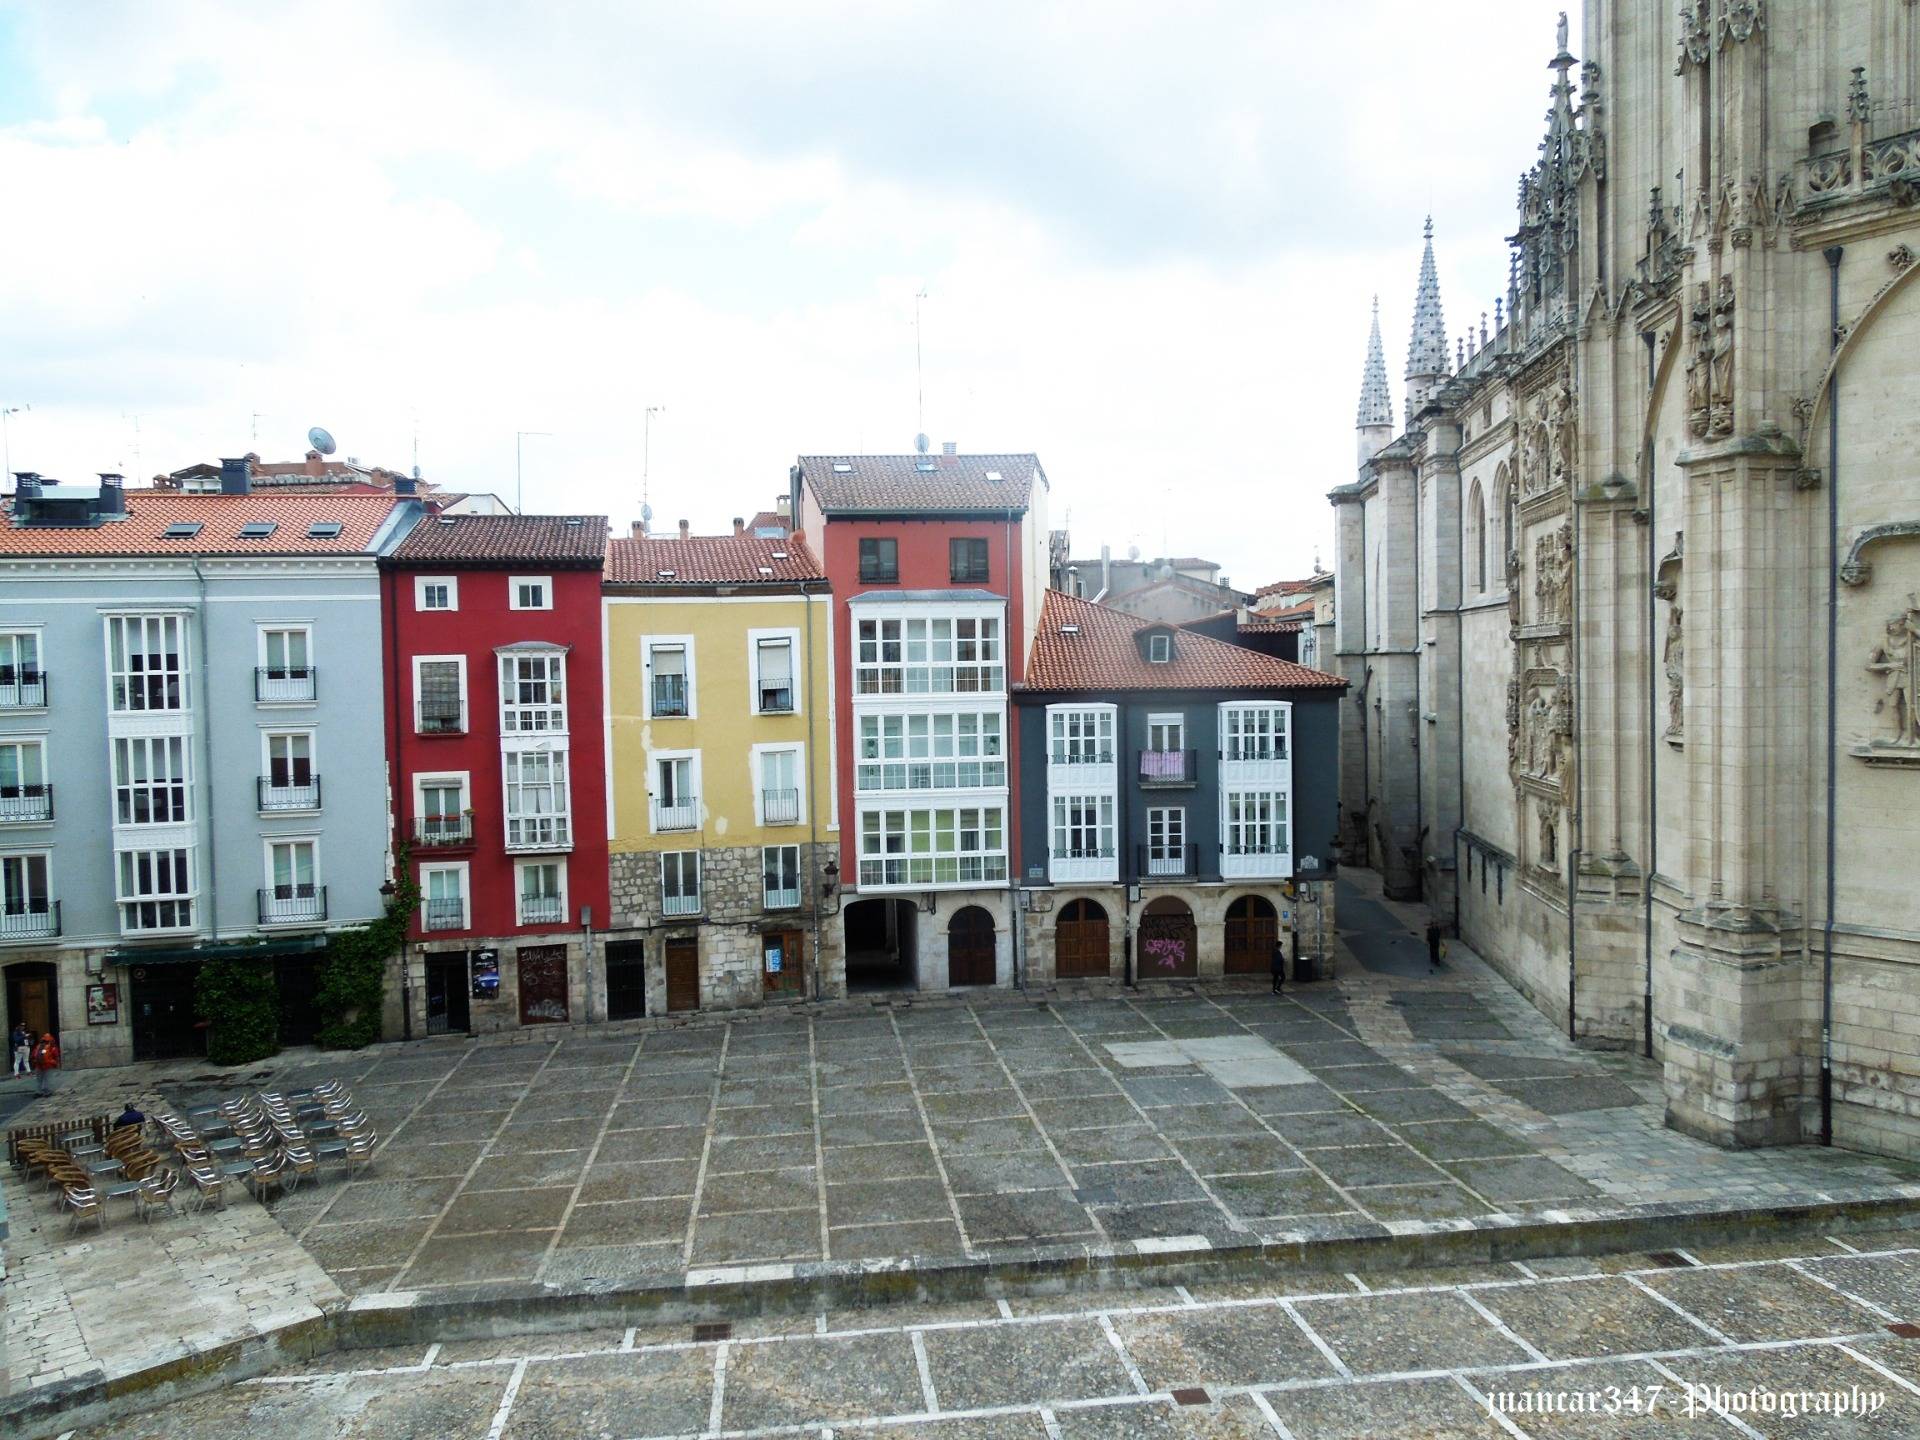 Historic houses next to the cathedral